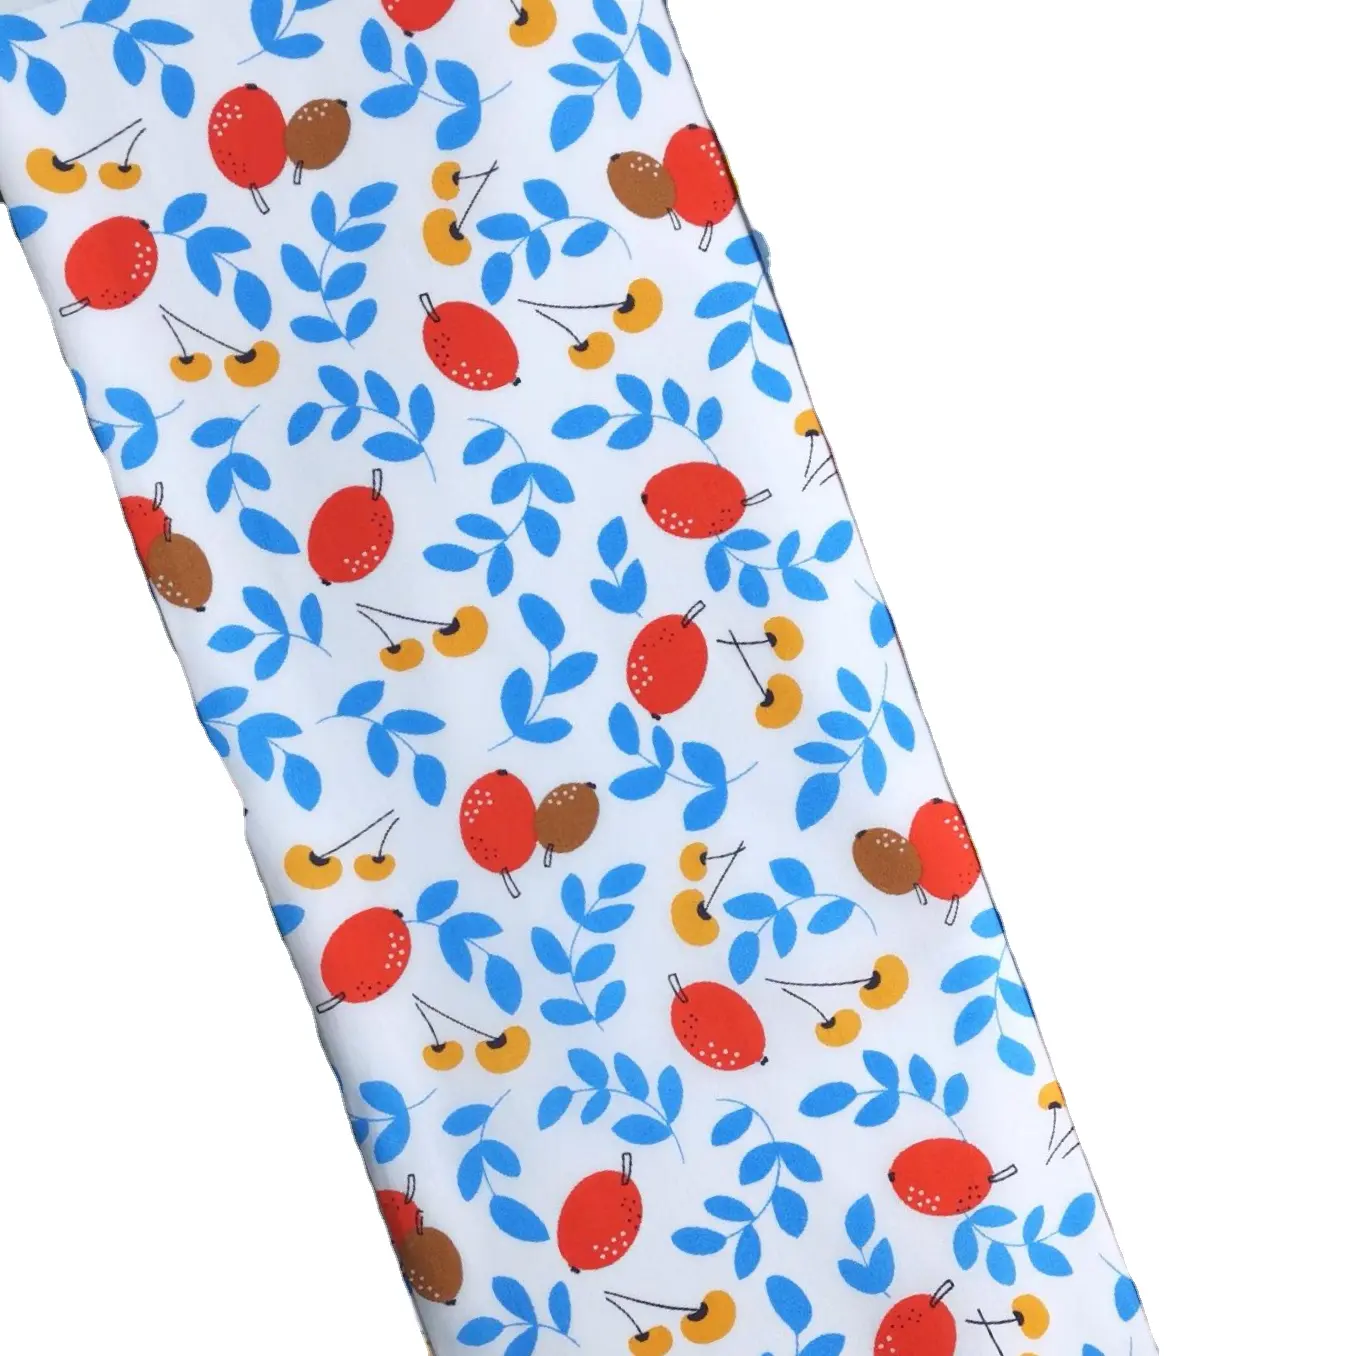 100% cotton printed fabric prints floral fruits for girls dress skirts